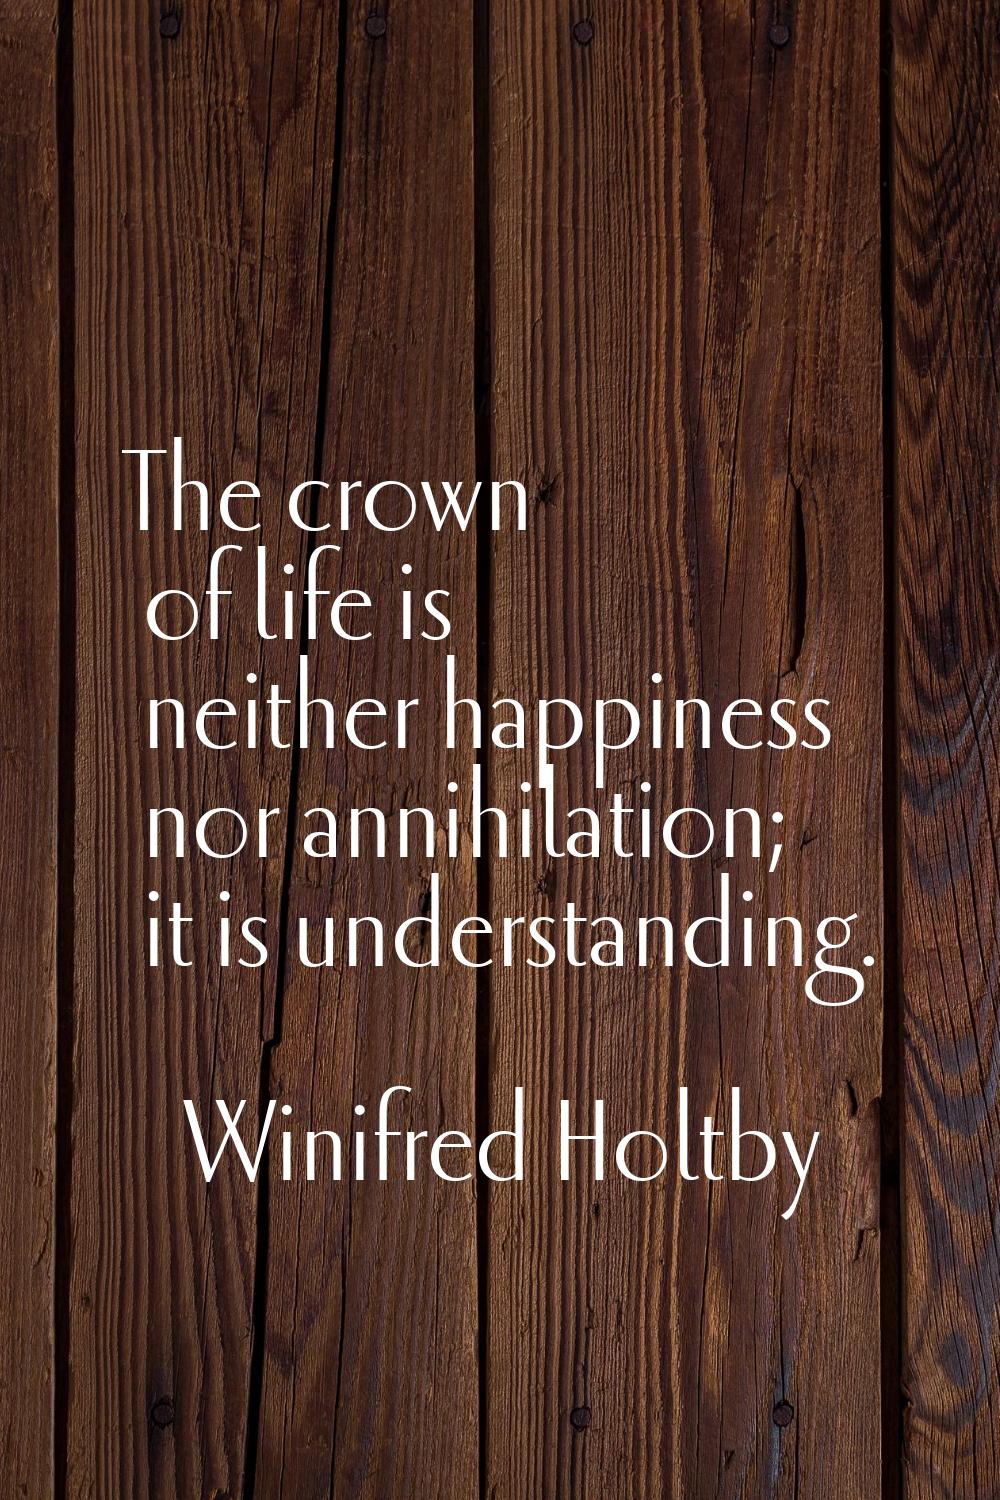 The crown of life is neither happiness nor annihilation; it is understanding.